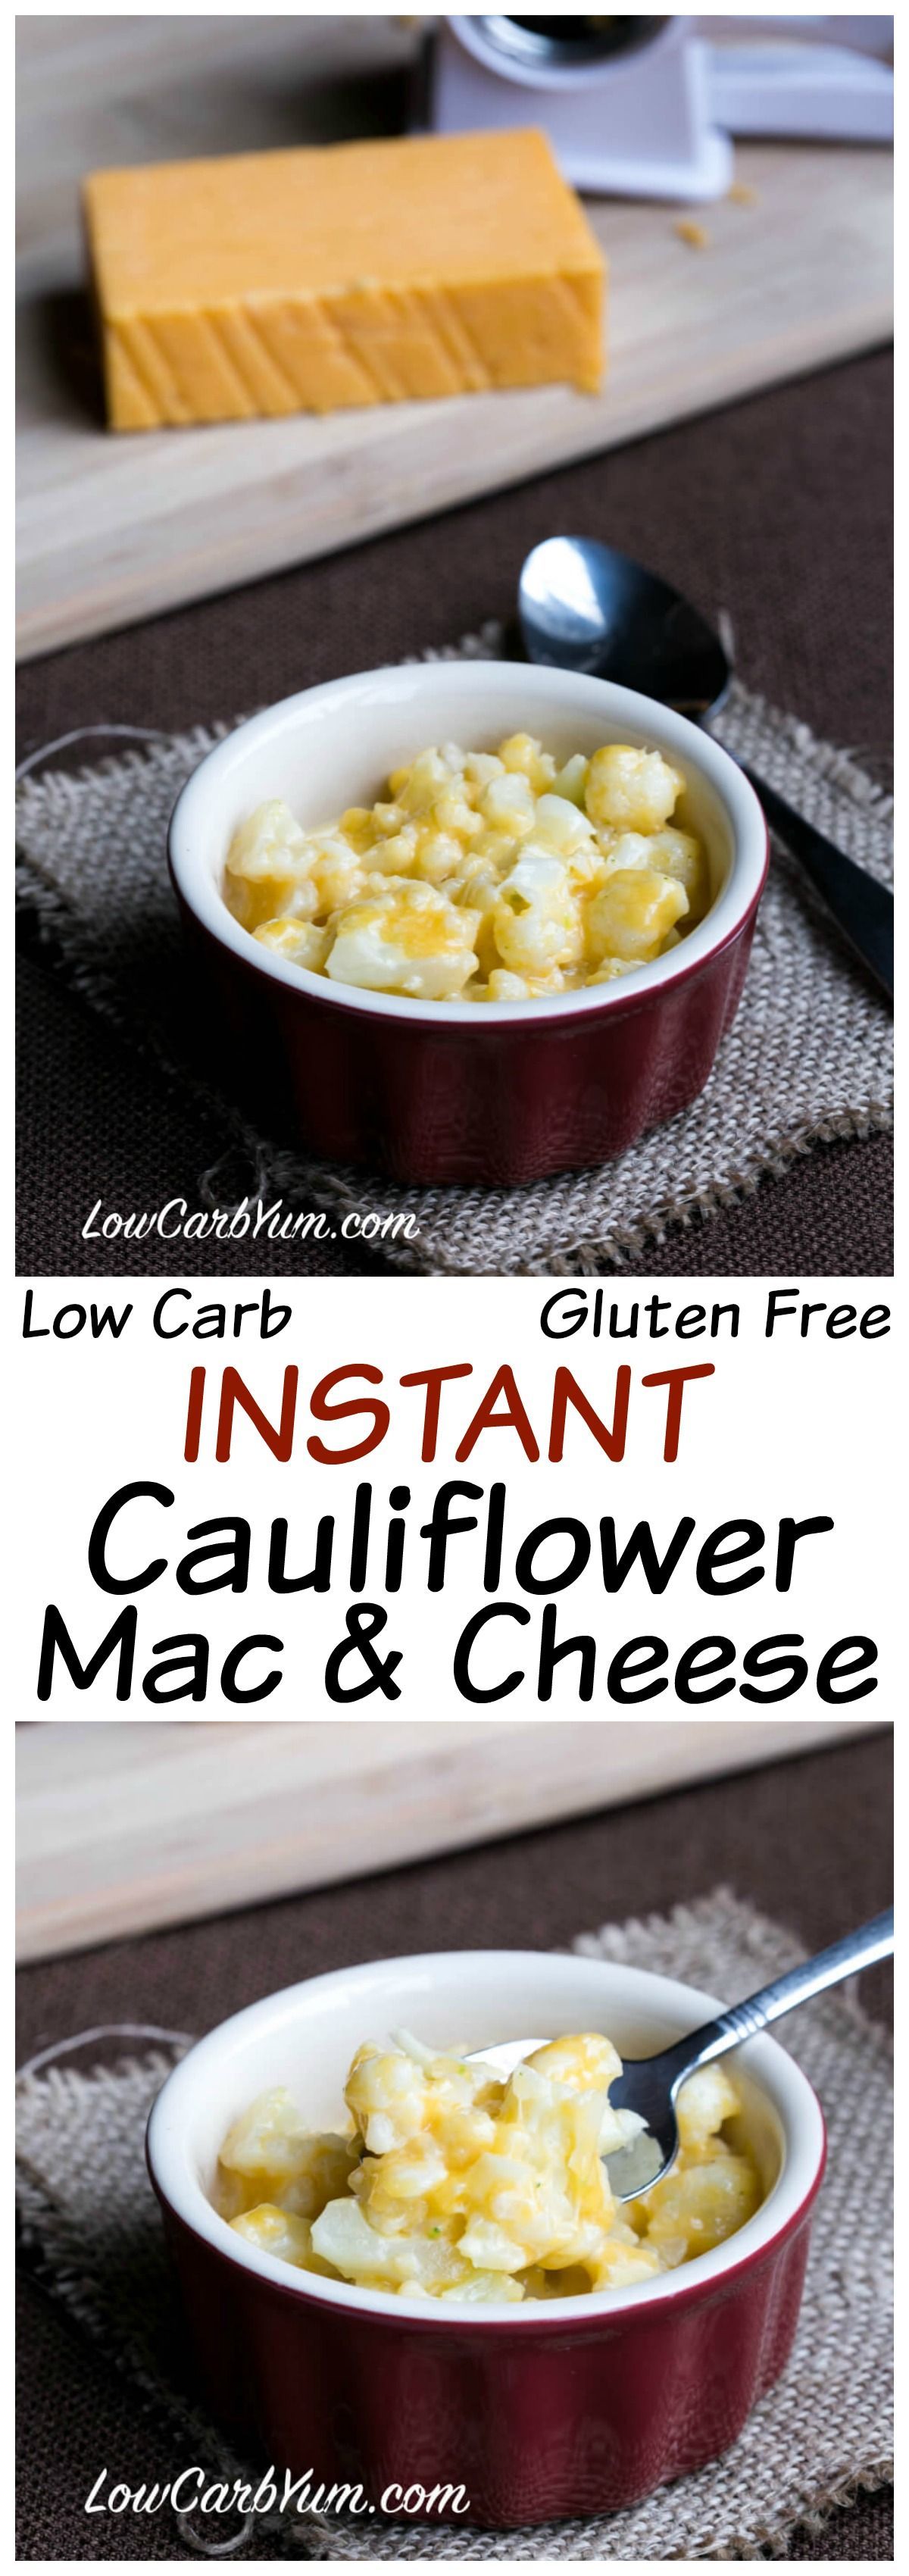 An instant low carb cauliflower mac and cheese recipe that is ready in less than 5 minutes. This quick cauli mac and cheese only requires 3 ingredients! Gluten free keto -   23 cauliflower recipes microwave
 ideas